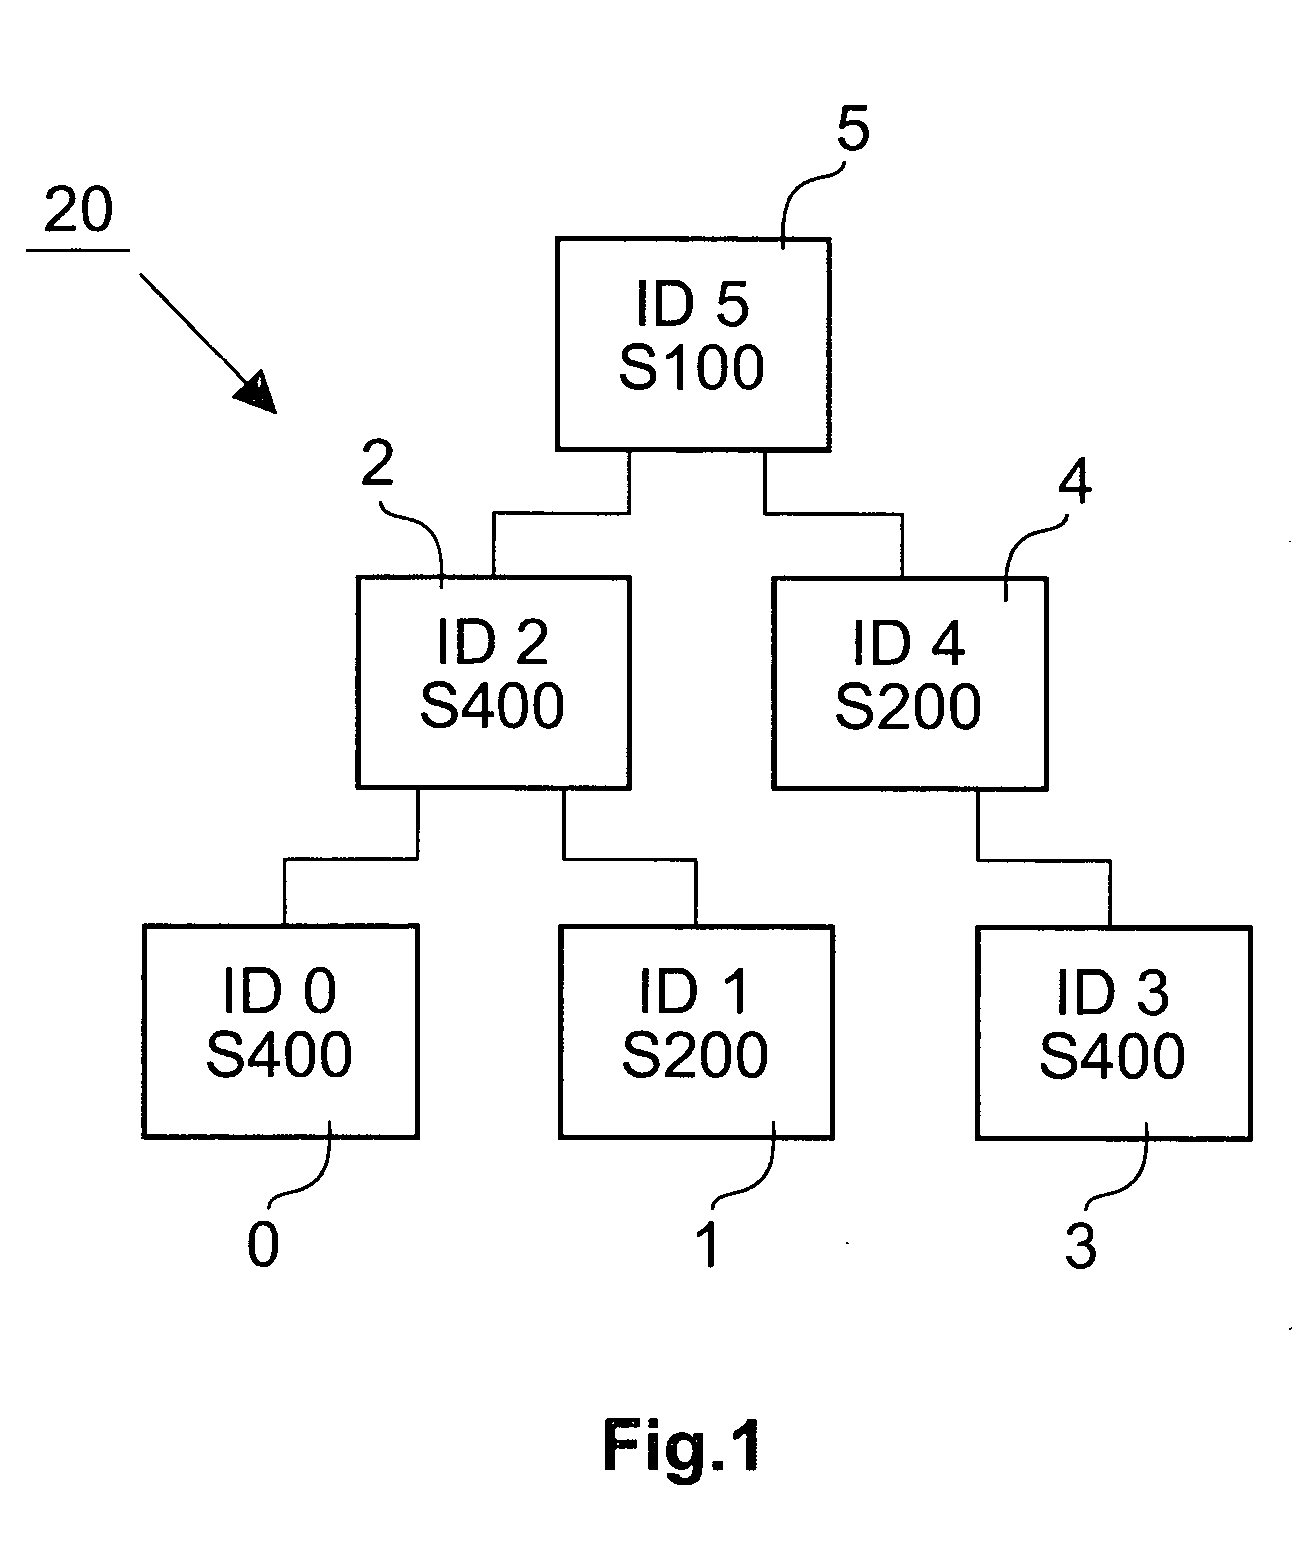 Method and device for acquiring electronic information about transmission speeds in a network